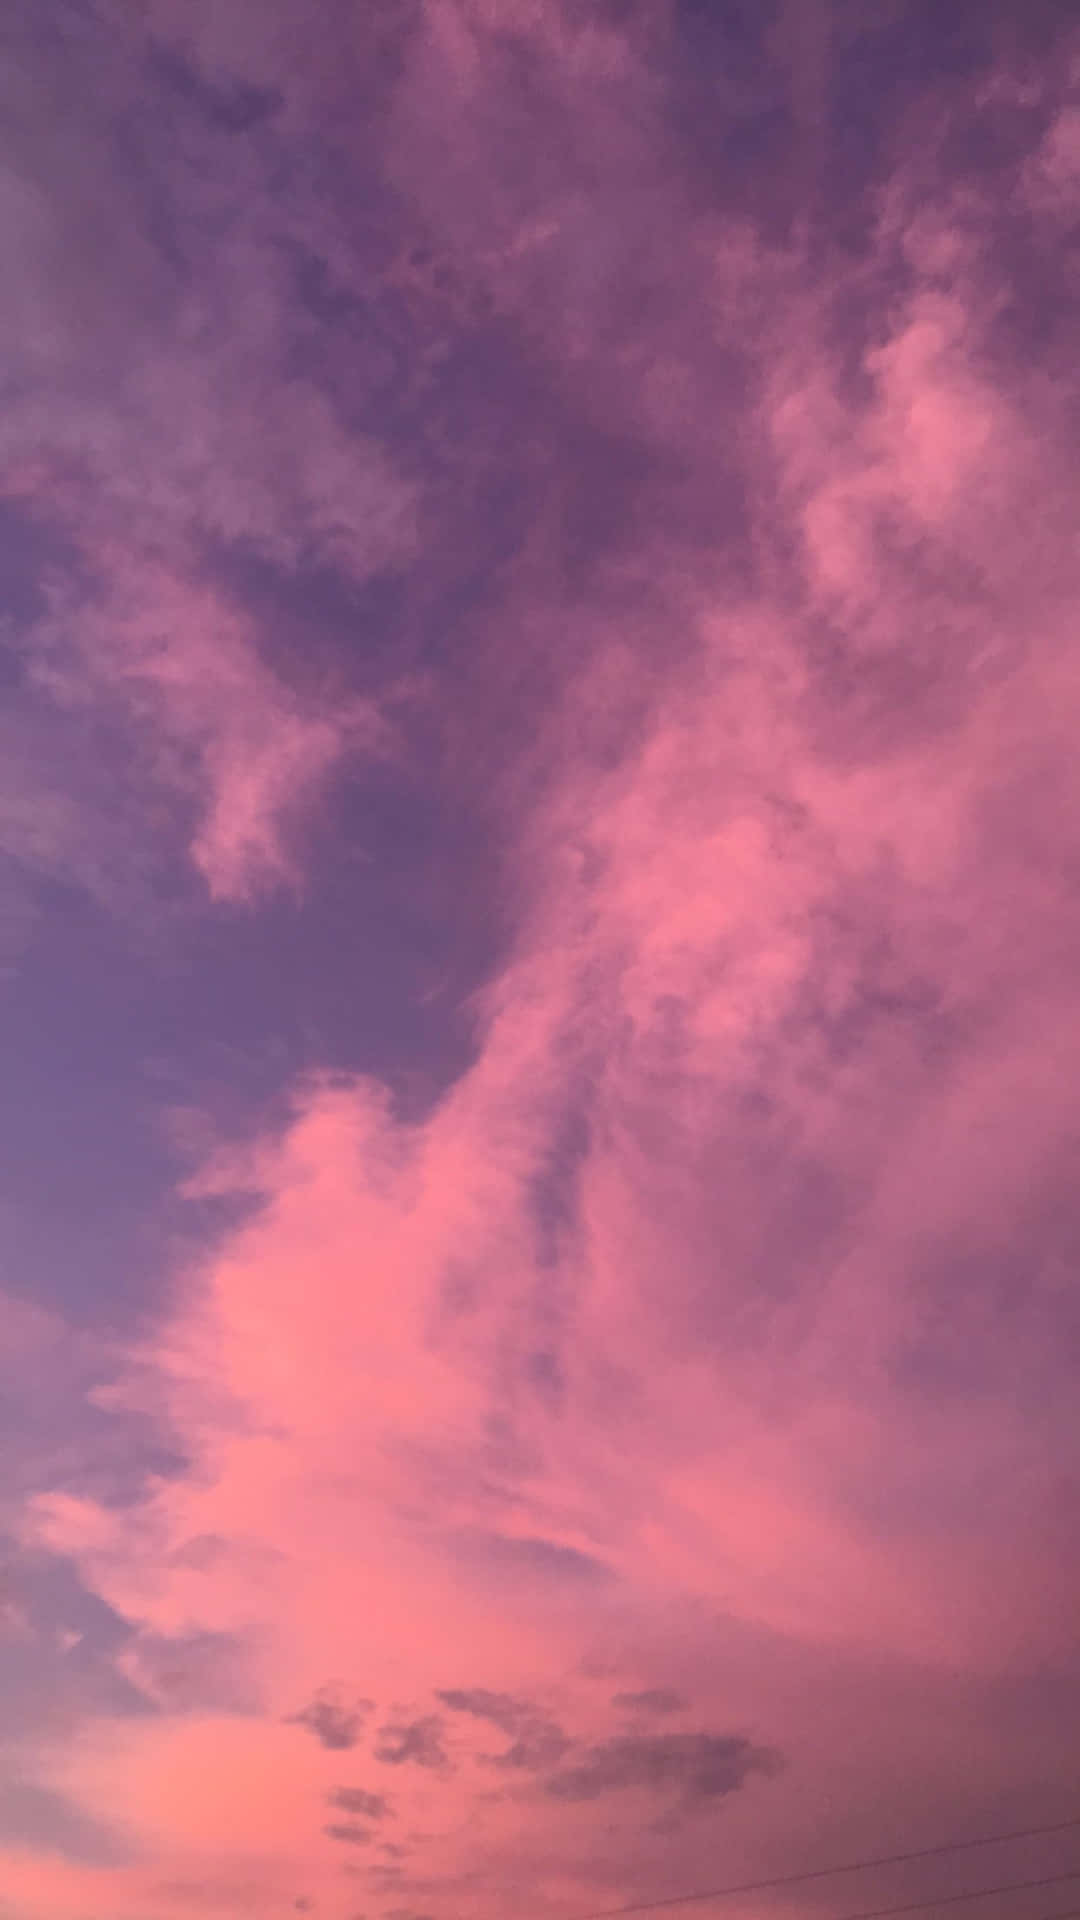 Make your nostalgic moments brighter with the beautiful "Pink Aesthetic iPhone" wallpaper Wallpaper